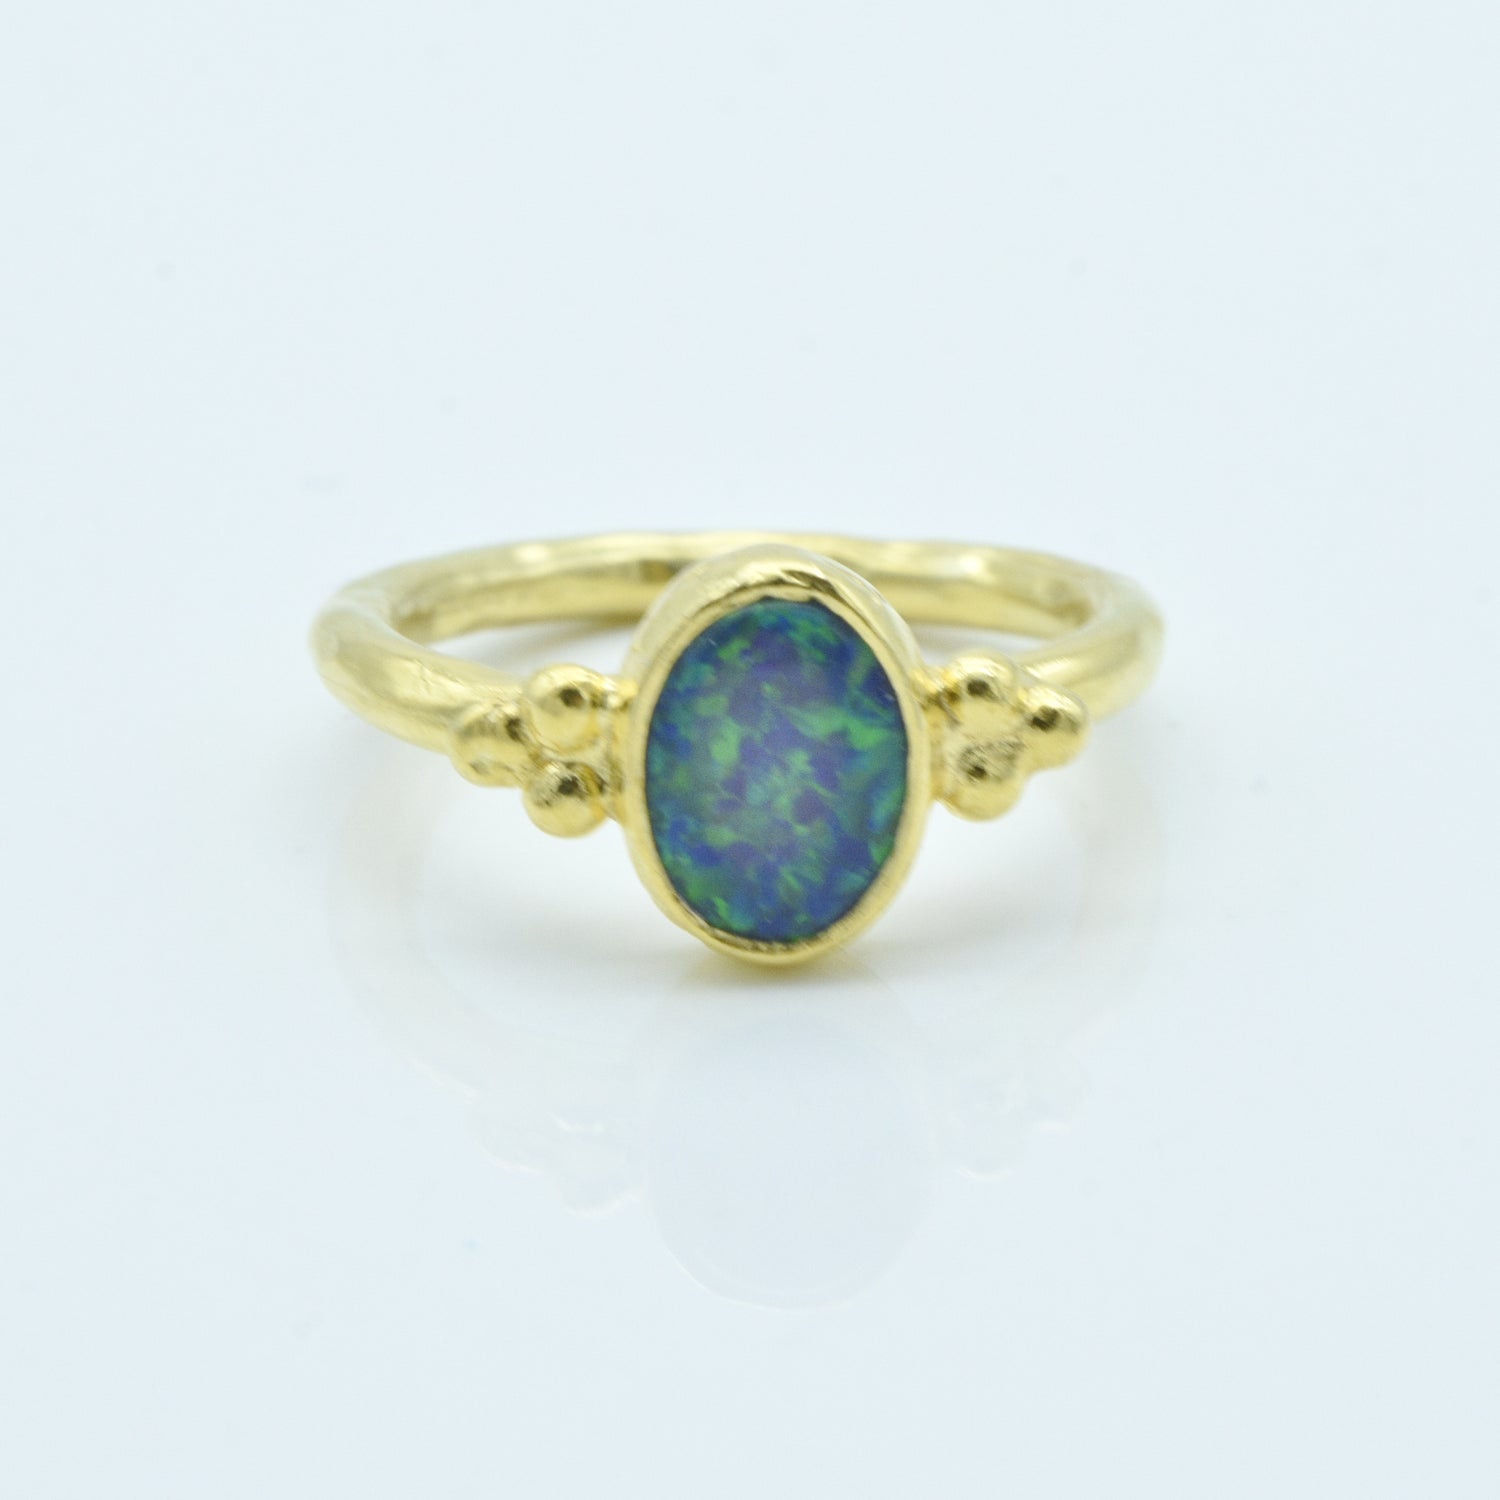 Aylas Opal ring - 21ct Gold plated 925 silver - Handmade in Ottoman Style by Artisan